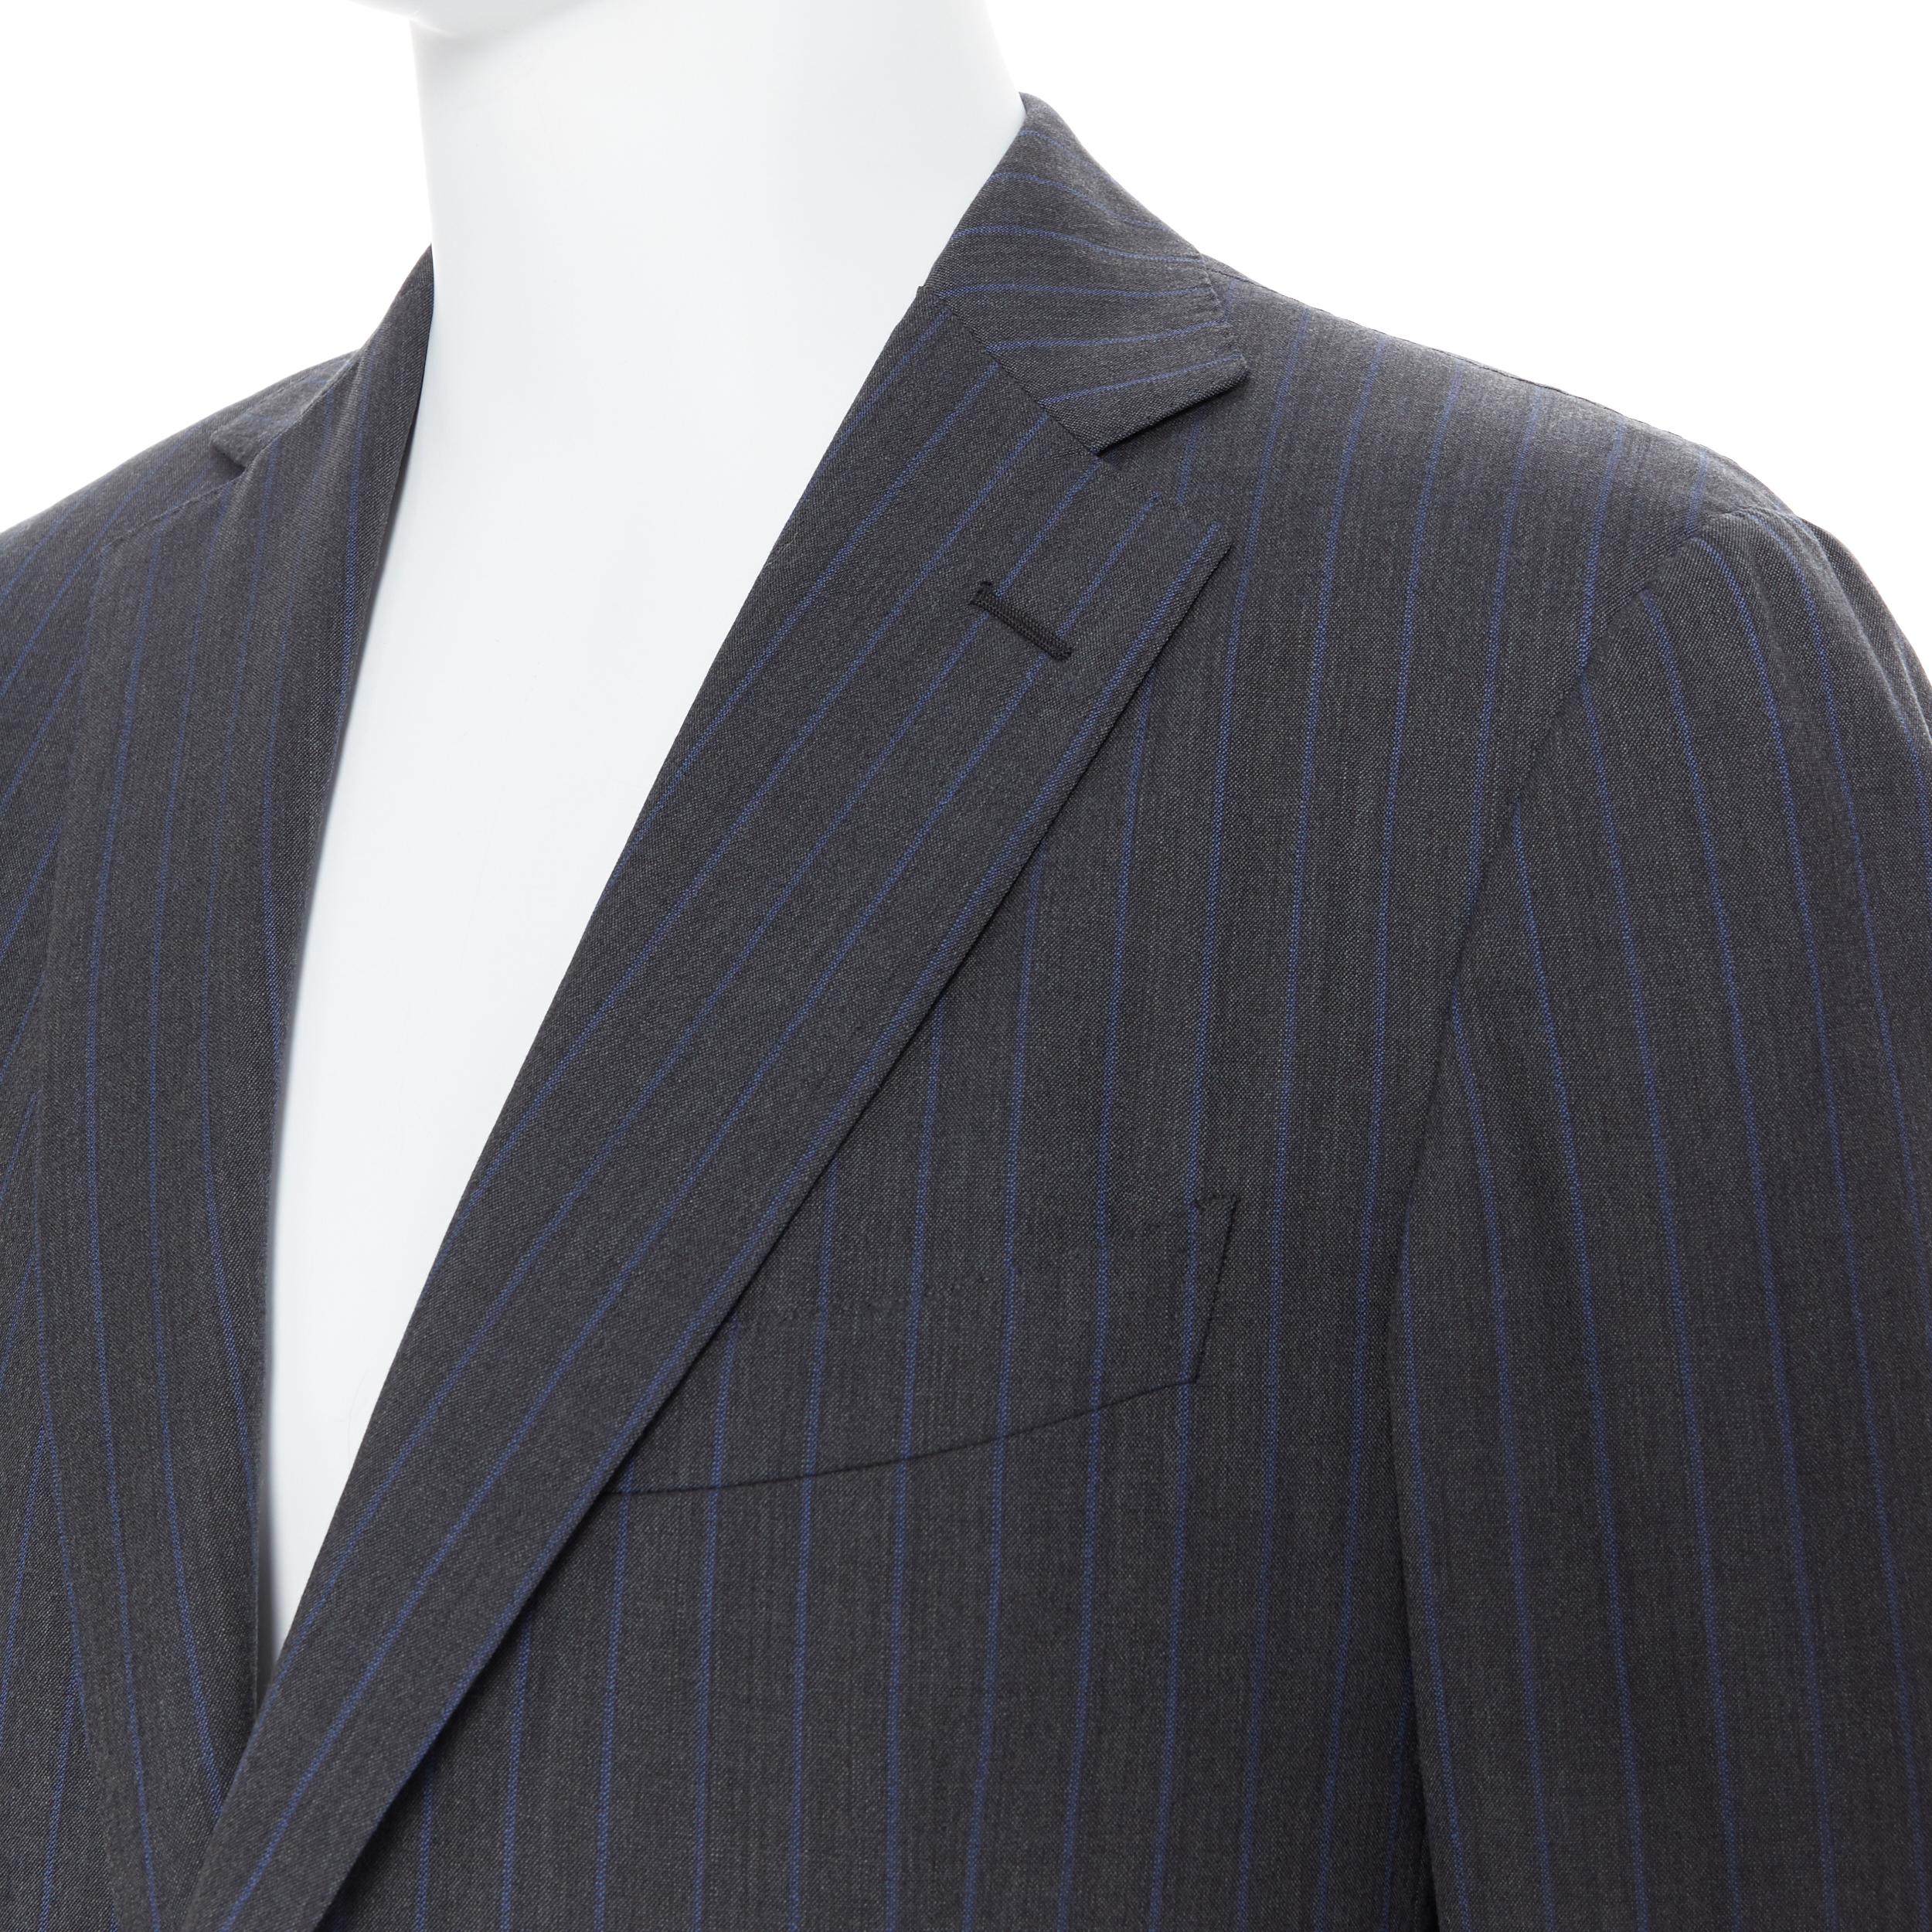 ERMENEGILDO ZEGNA Cool Effect grey blue pinstripe wool classic blazer jacket 50R 
Reference: LNKO/A01657 
Brand: Ermenegildo Zegna 
Material: Wool 
Color: Grey 
Pattern: Striped 
Closure: Button 
Extra Detail: Cool effect collection. 
Made in: Italy